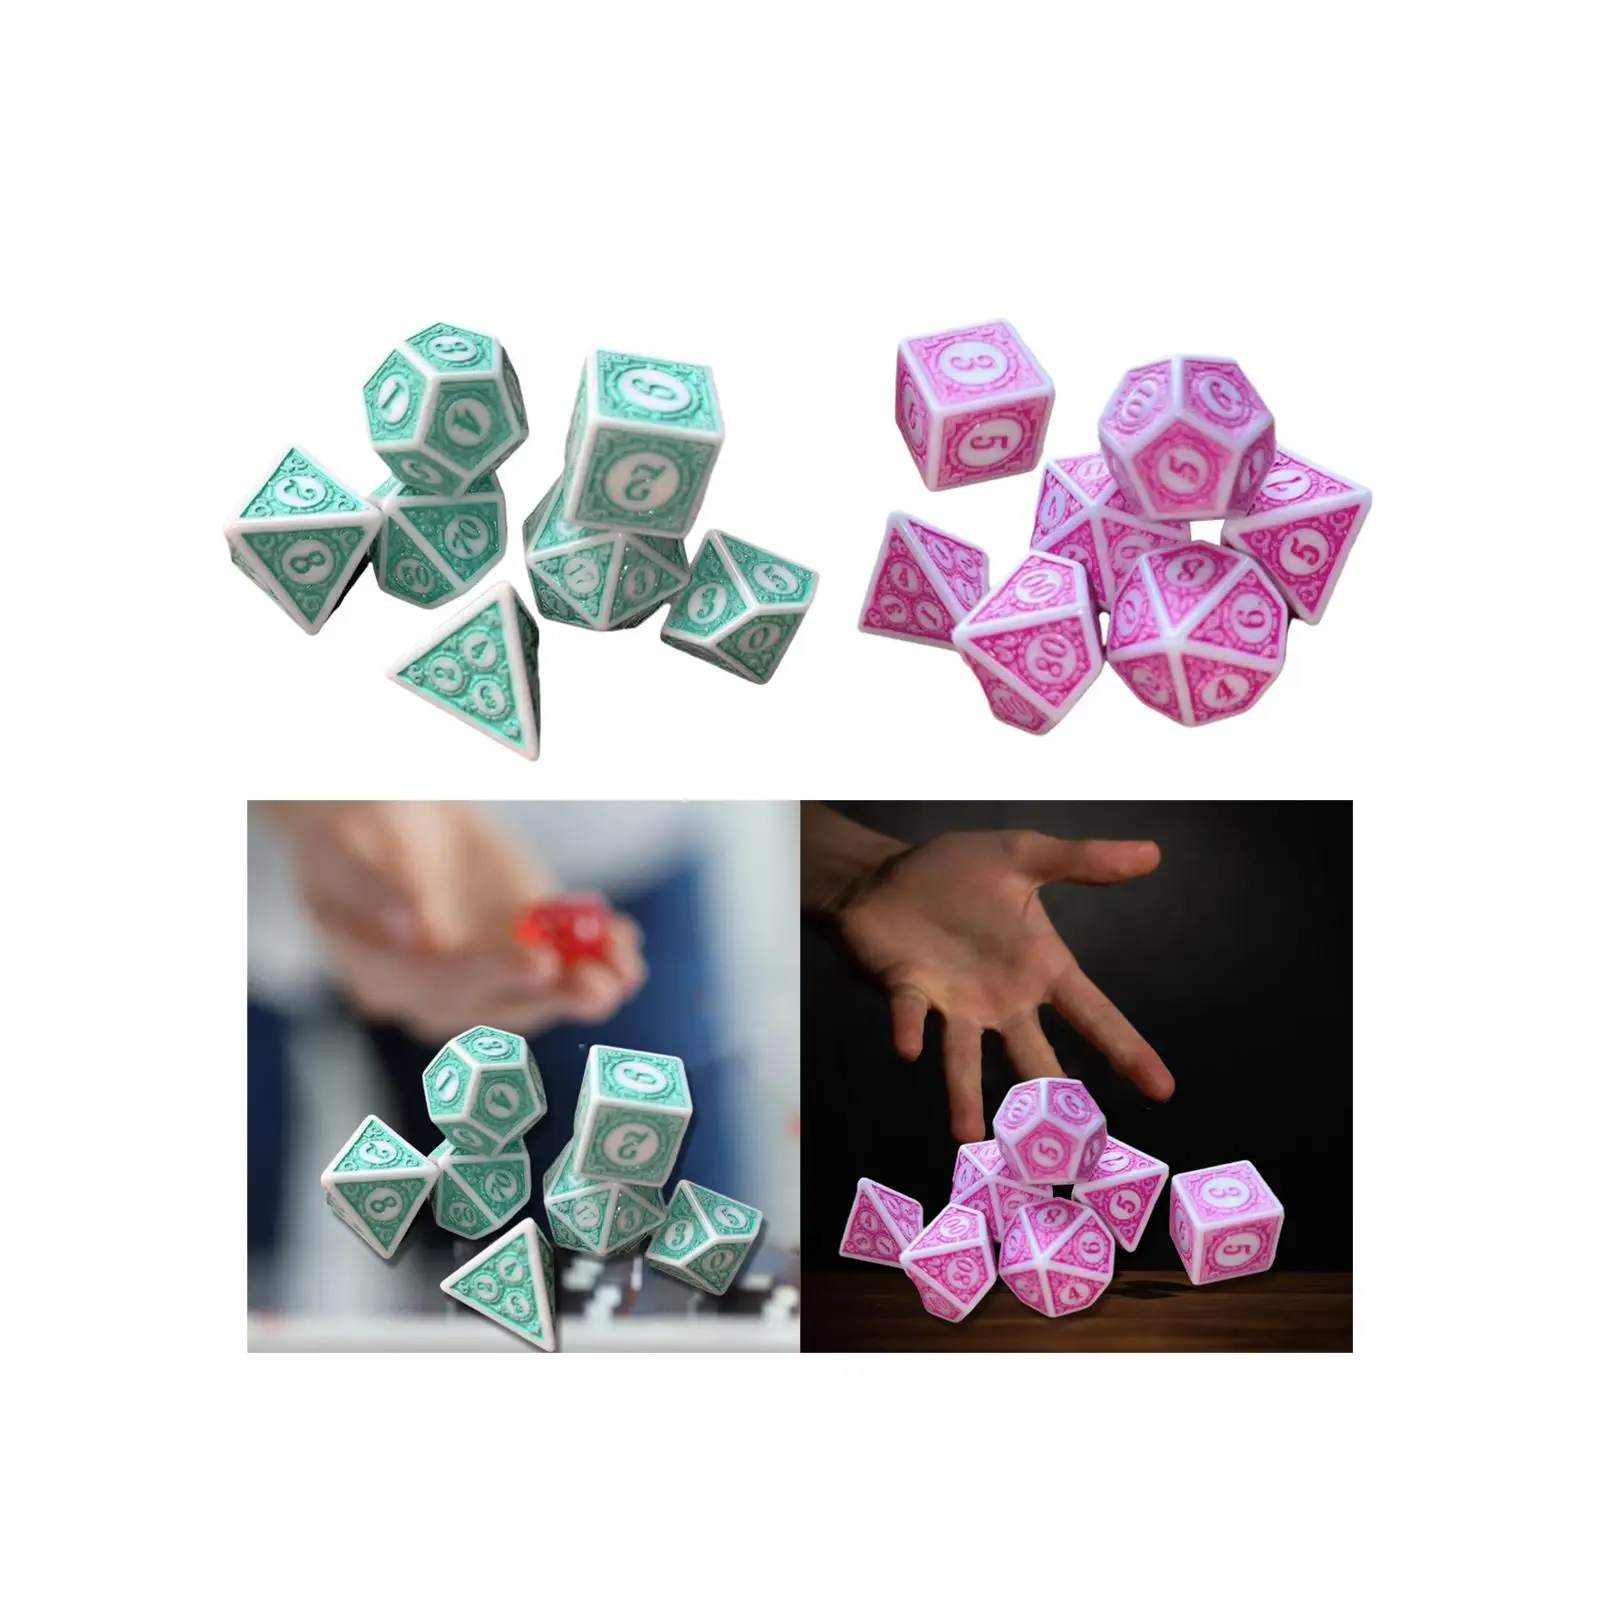 7 Pieces Game Dices Set Party Favors Polyhedral Dices for KTV Bar Table Game